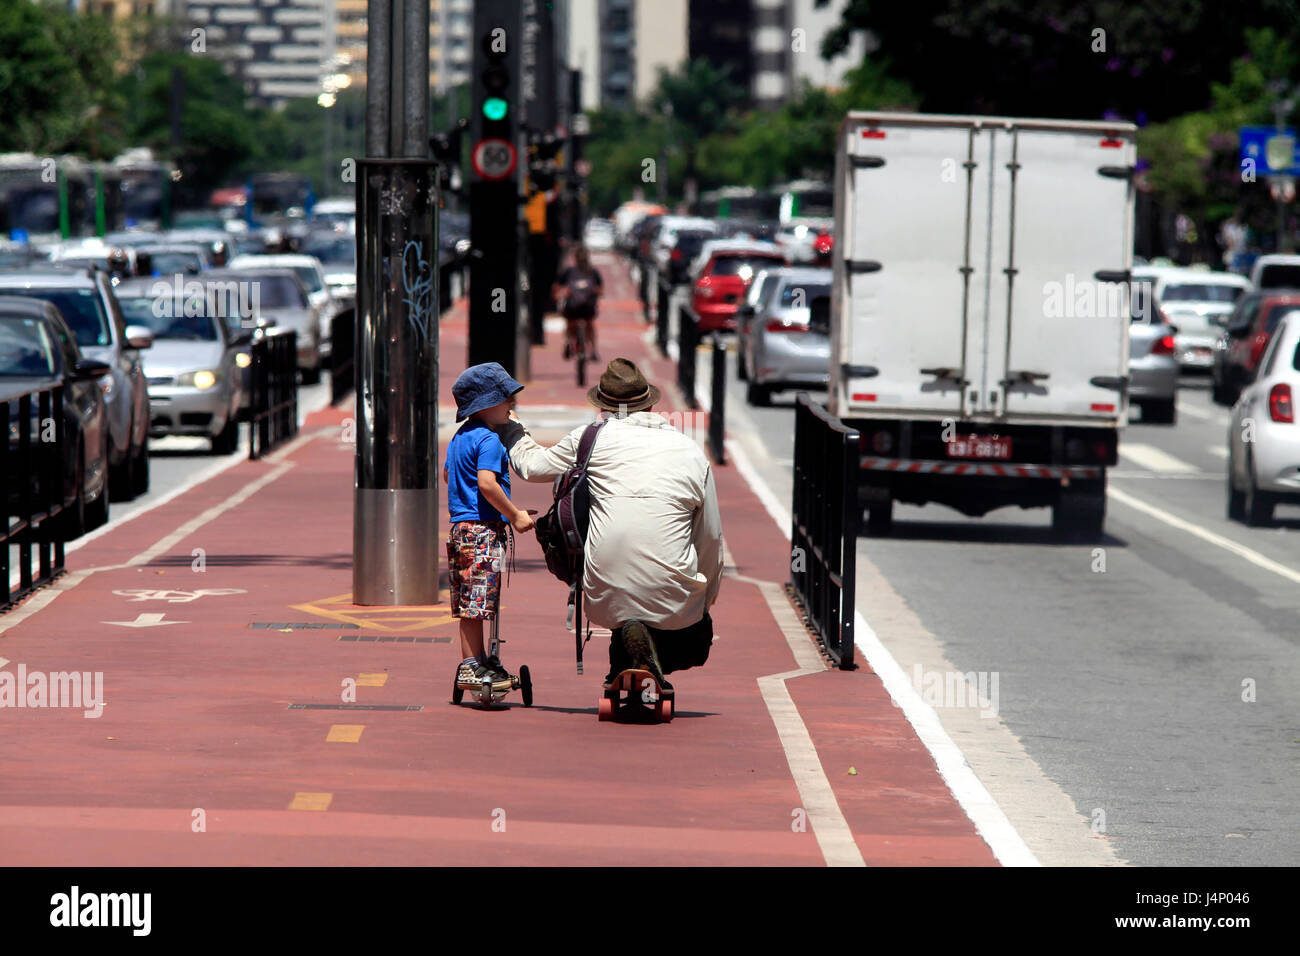 Father skateboarding and son riding a scooter on the cycle path of Paulista avenue - São Paulo city - Brazil Stock Photo